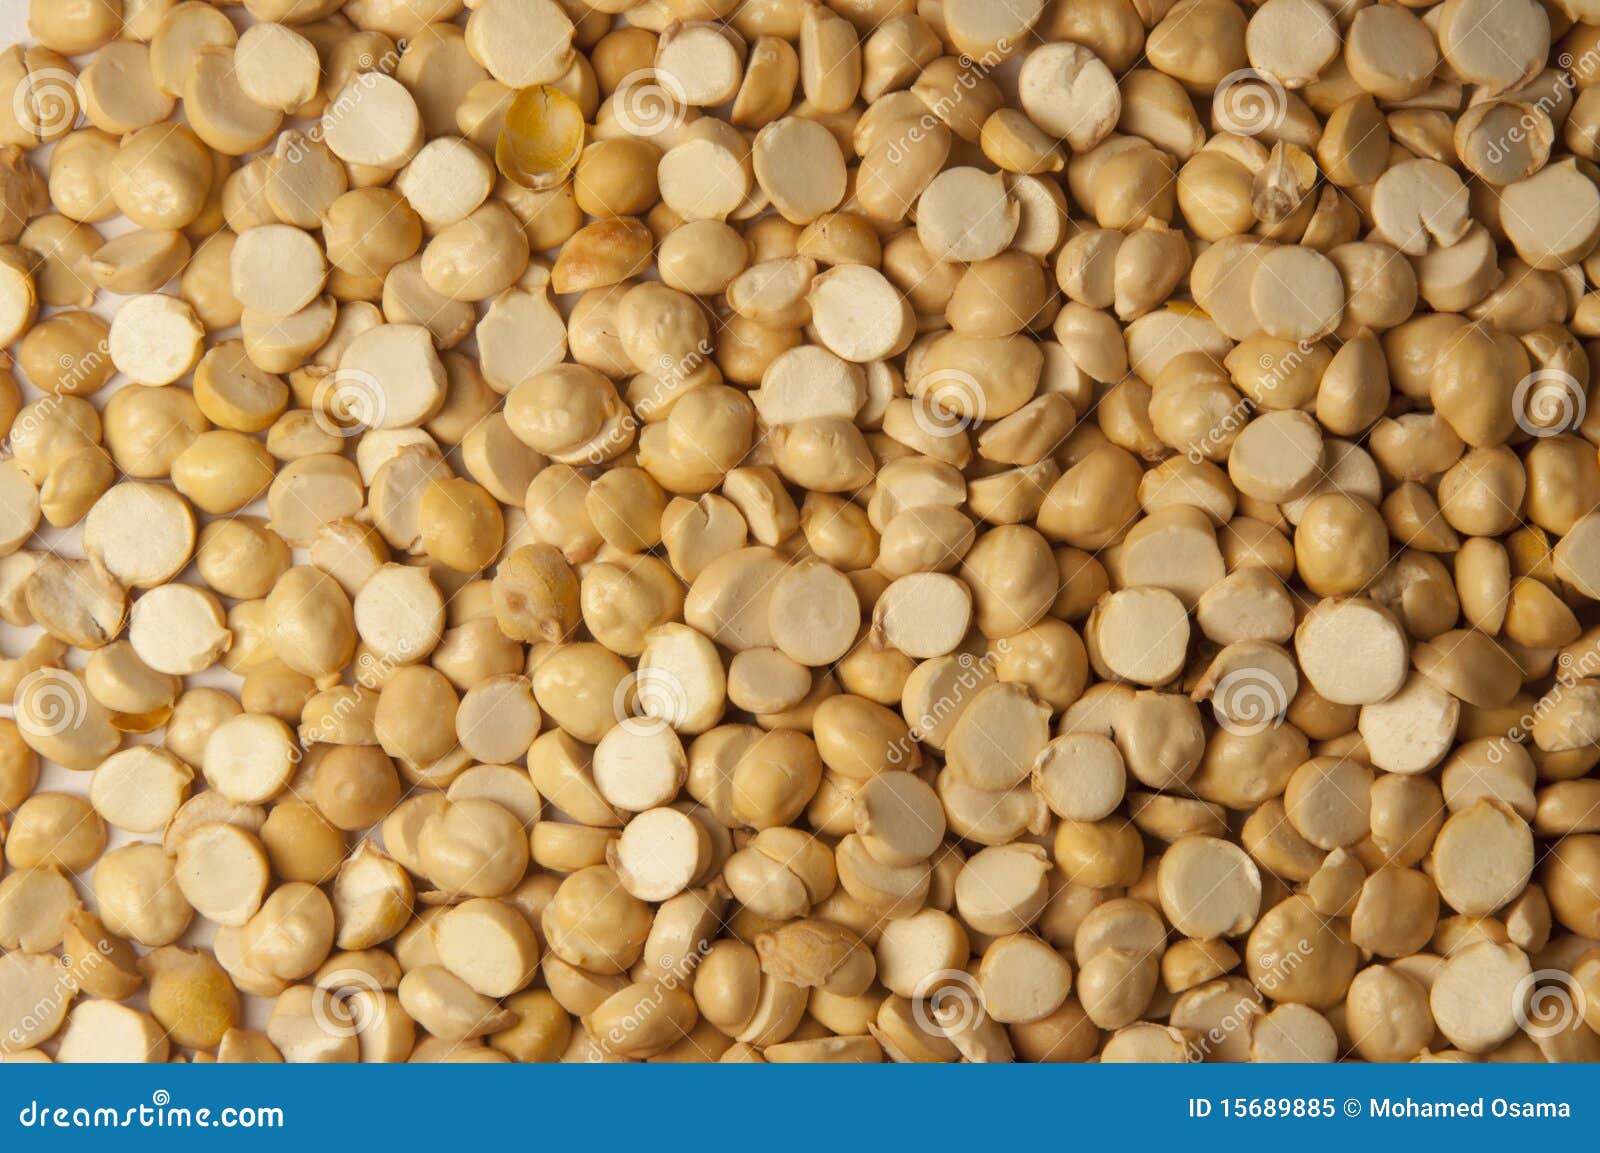 dry chickpea background